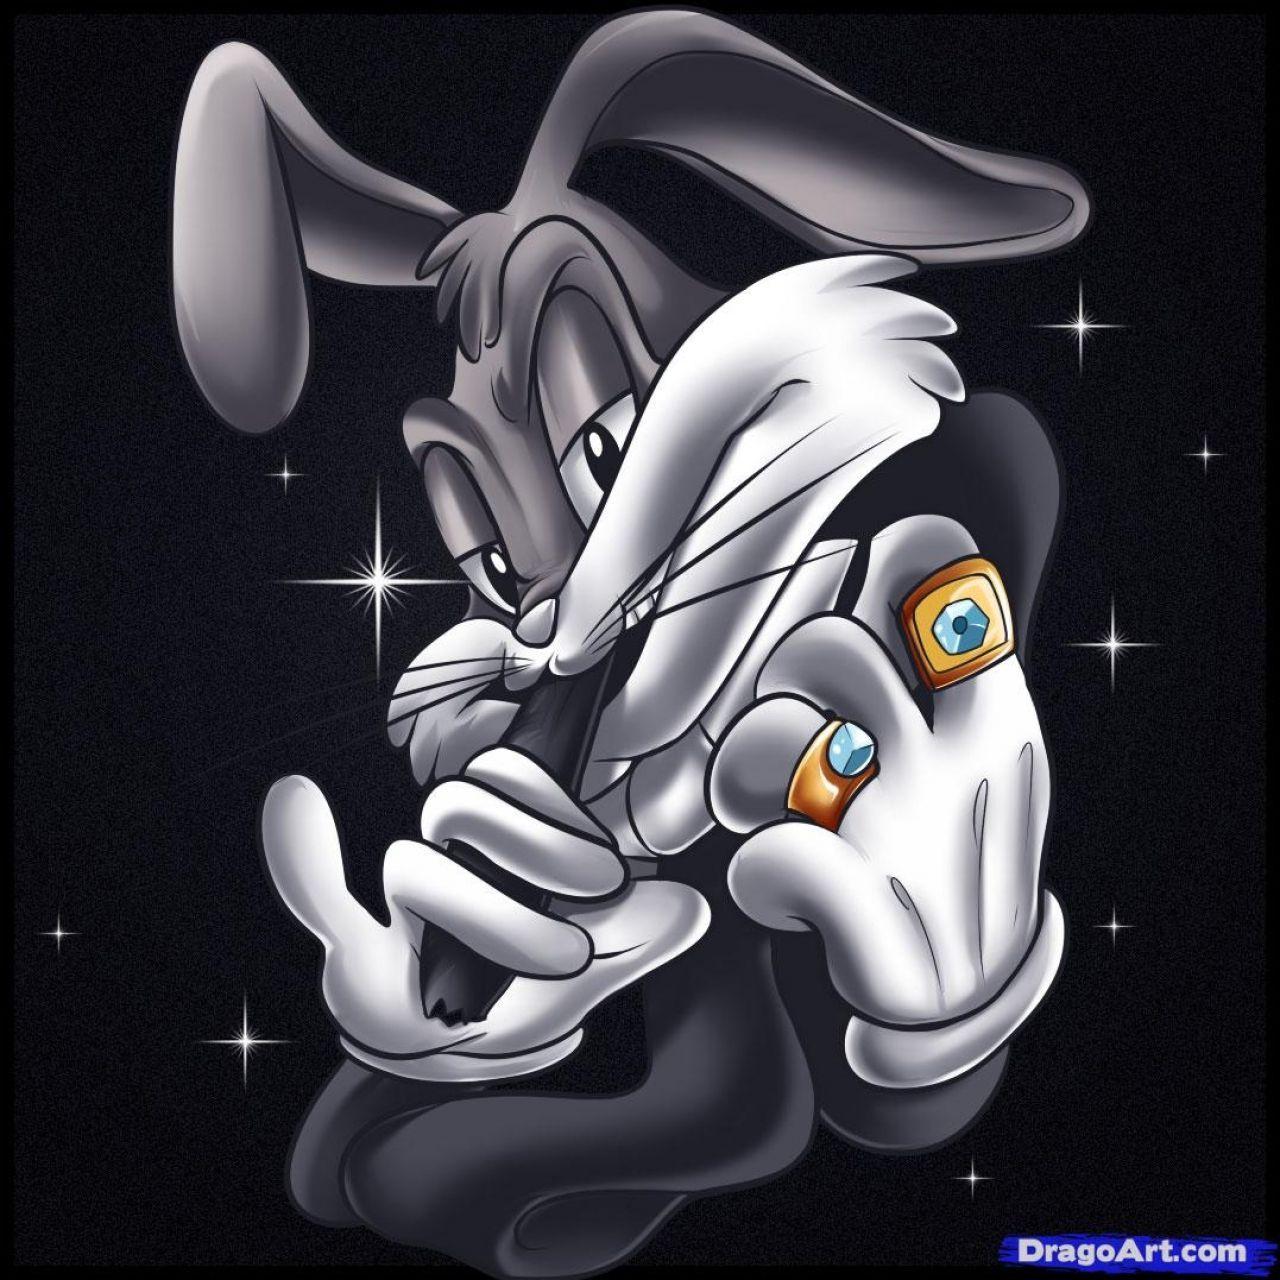 Pix For > Looney Tunes Gangster Wallpaper